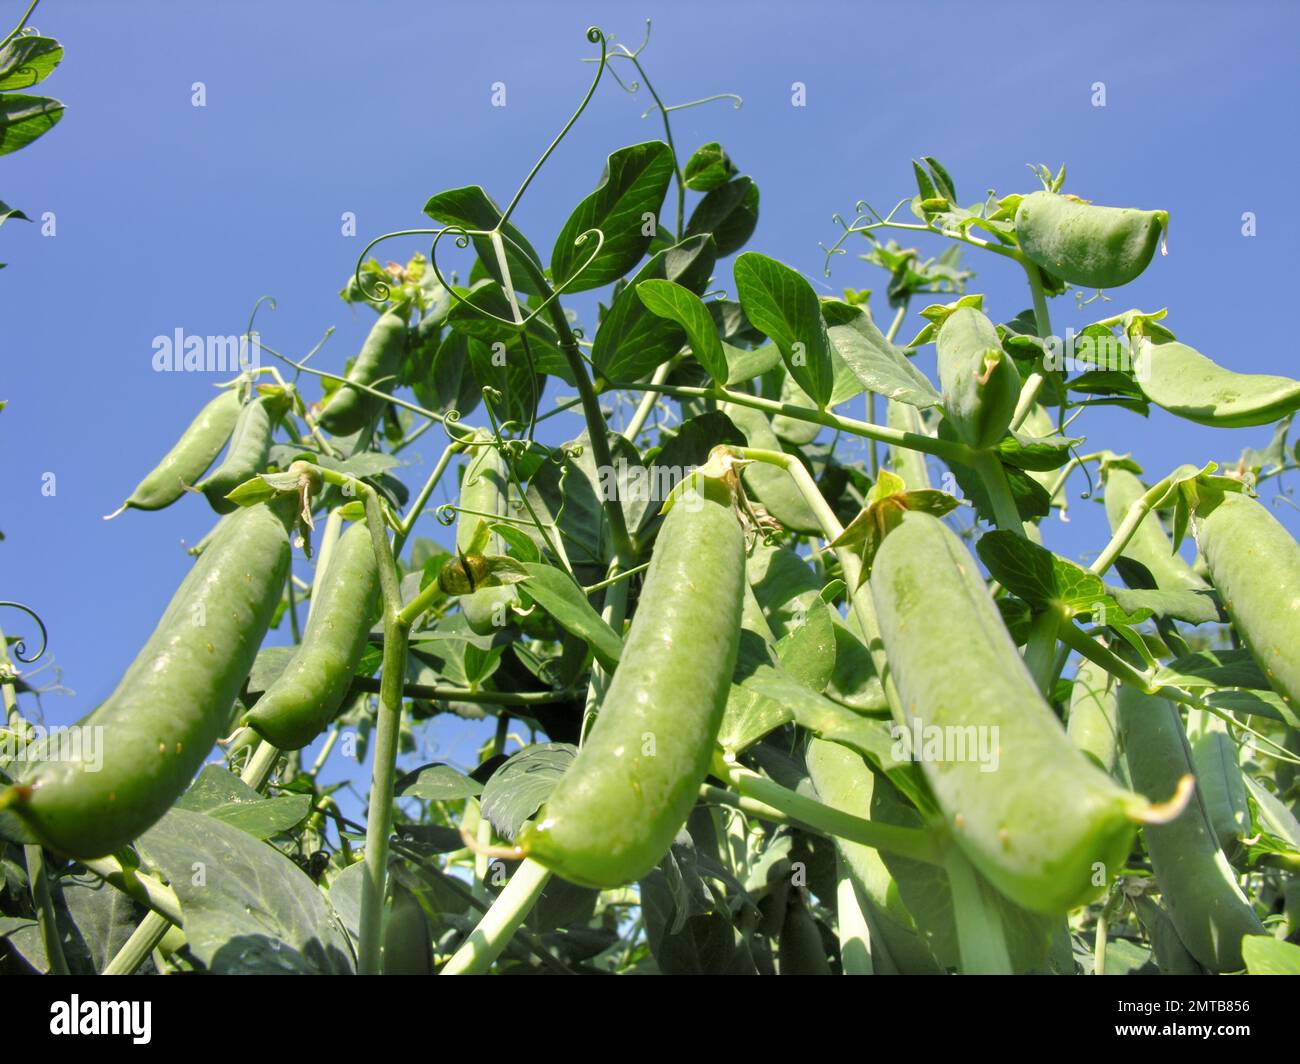 close-up of the growing garden pea in the vegetable garden Stock Photo